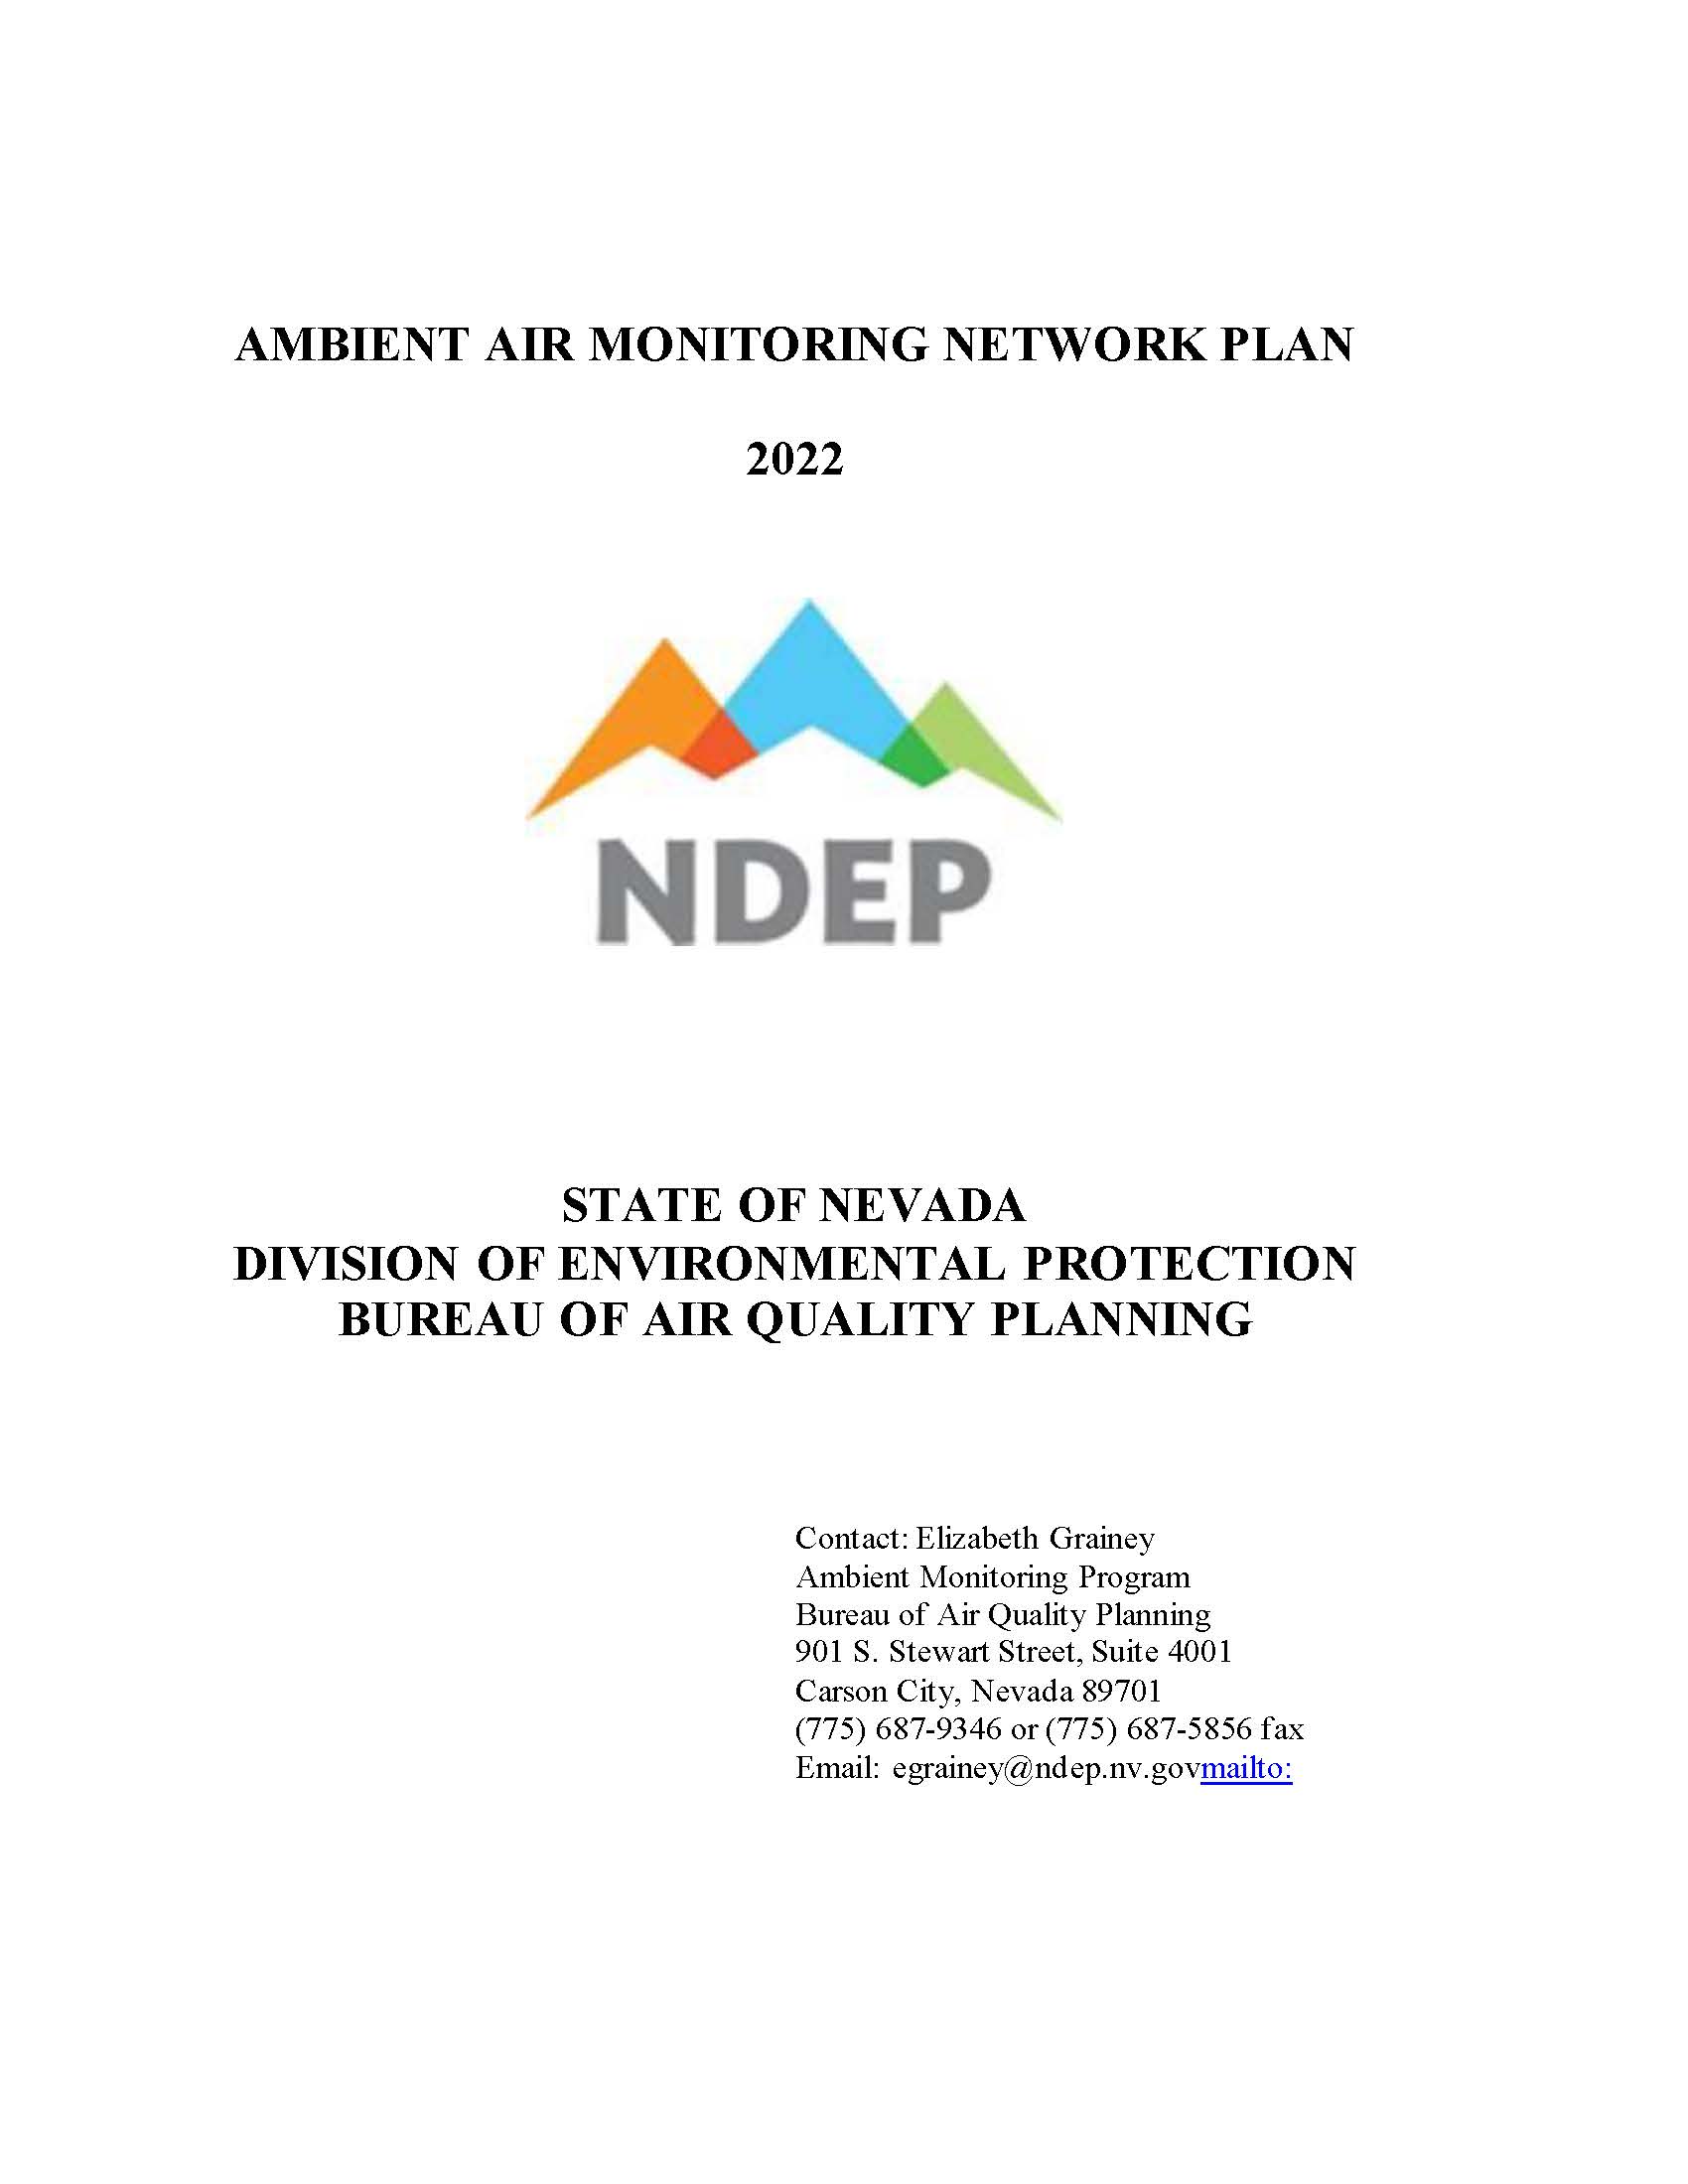 2022 Ambient Air Monitoring Network Plan